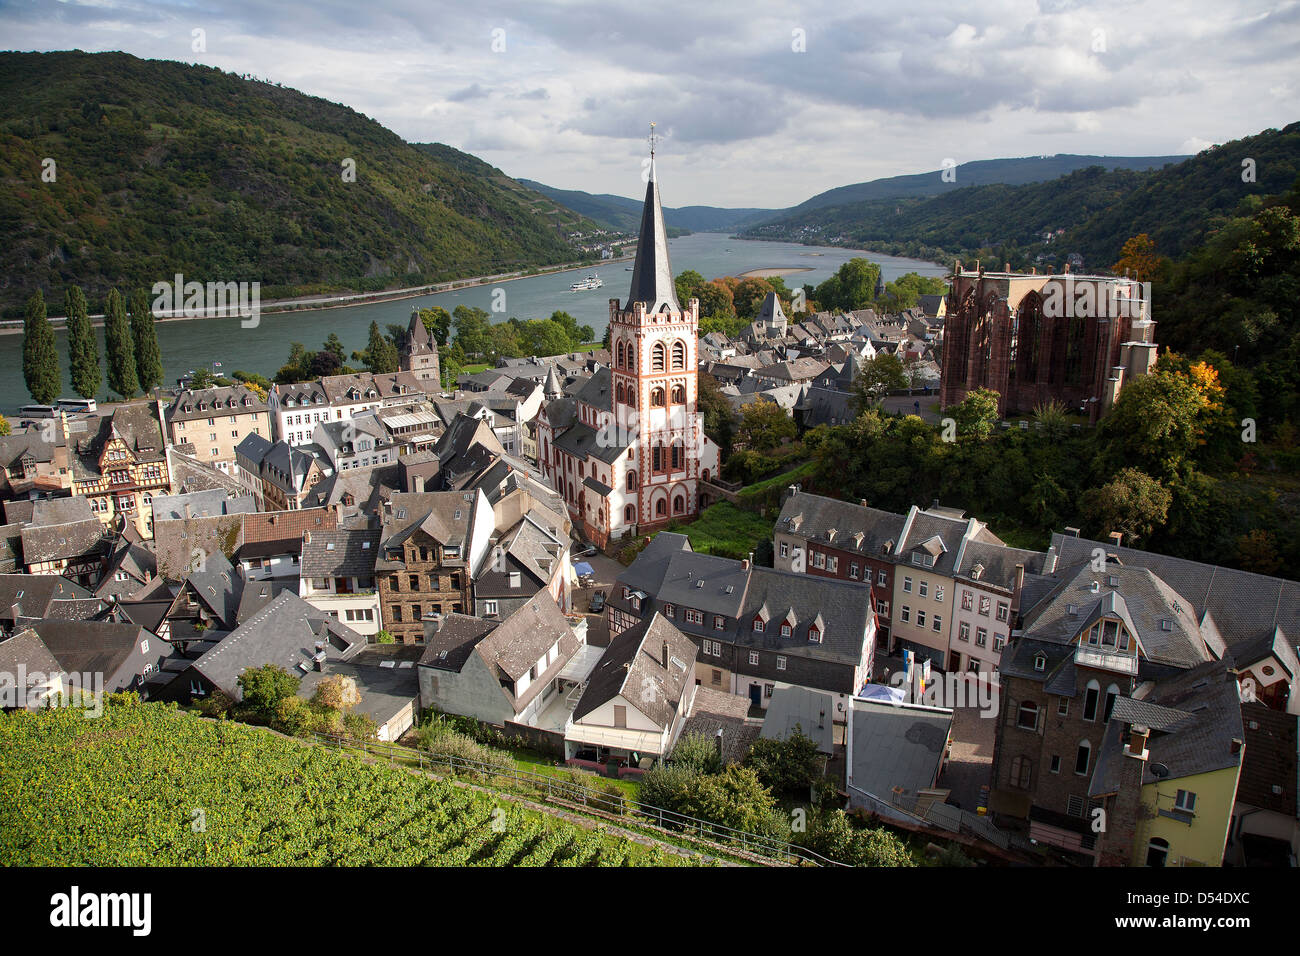 Bacharach, Germany, view over Bacharach Stock Photo